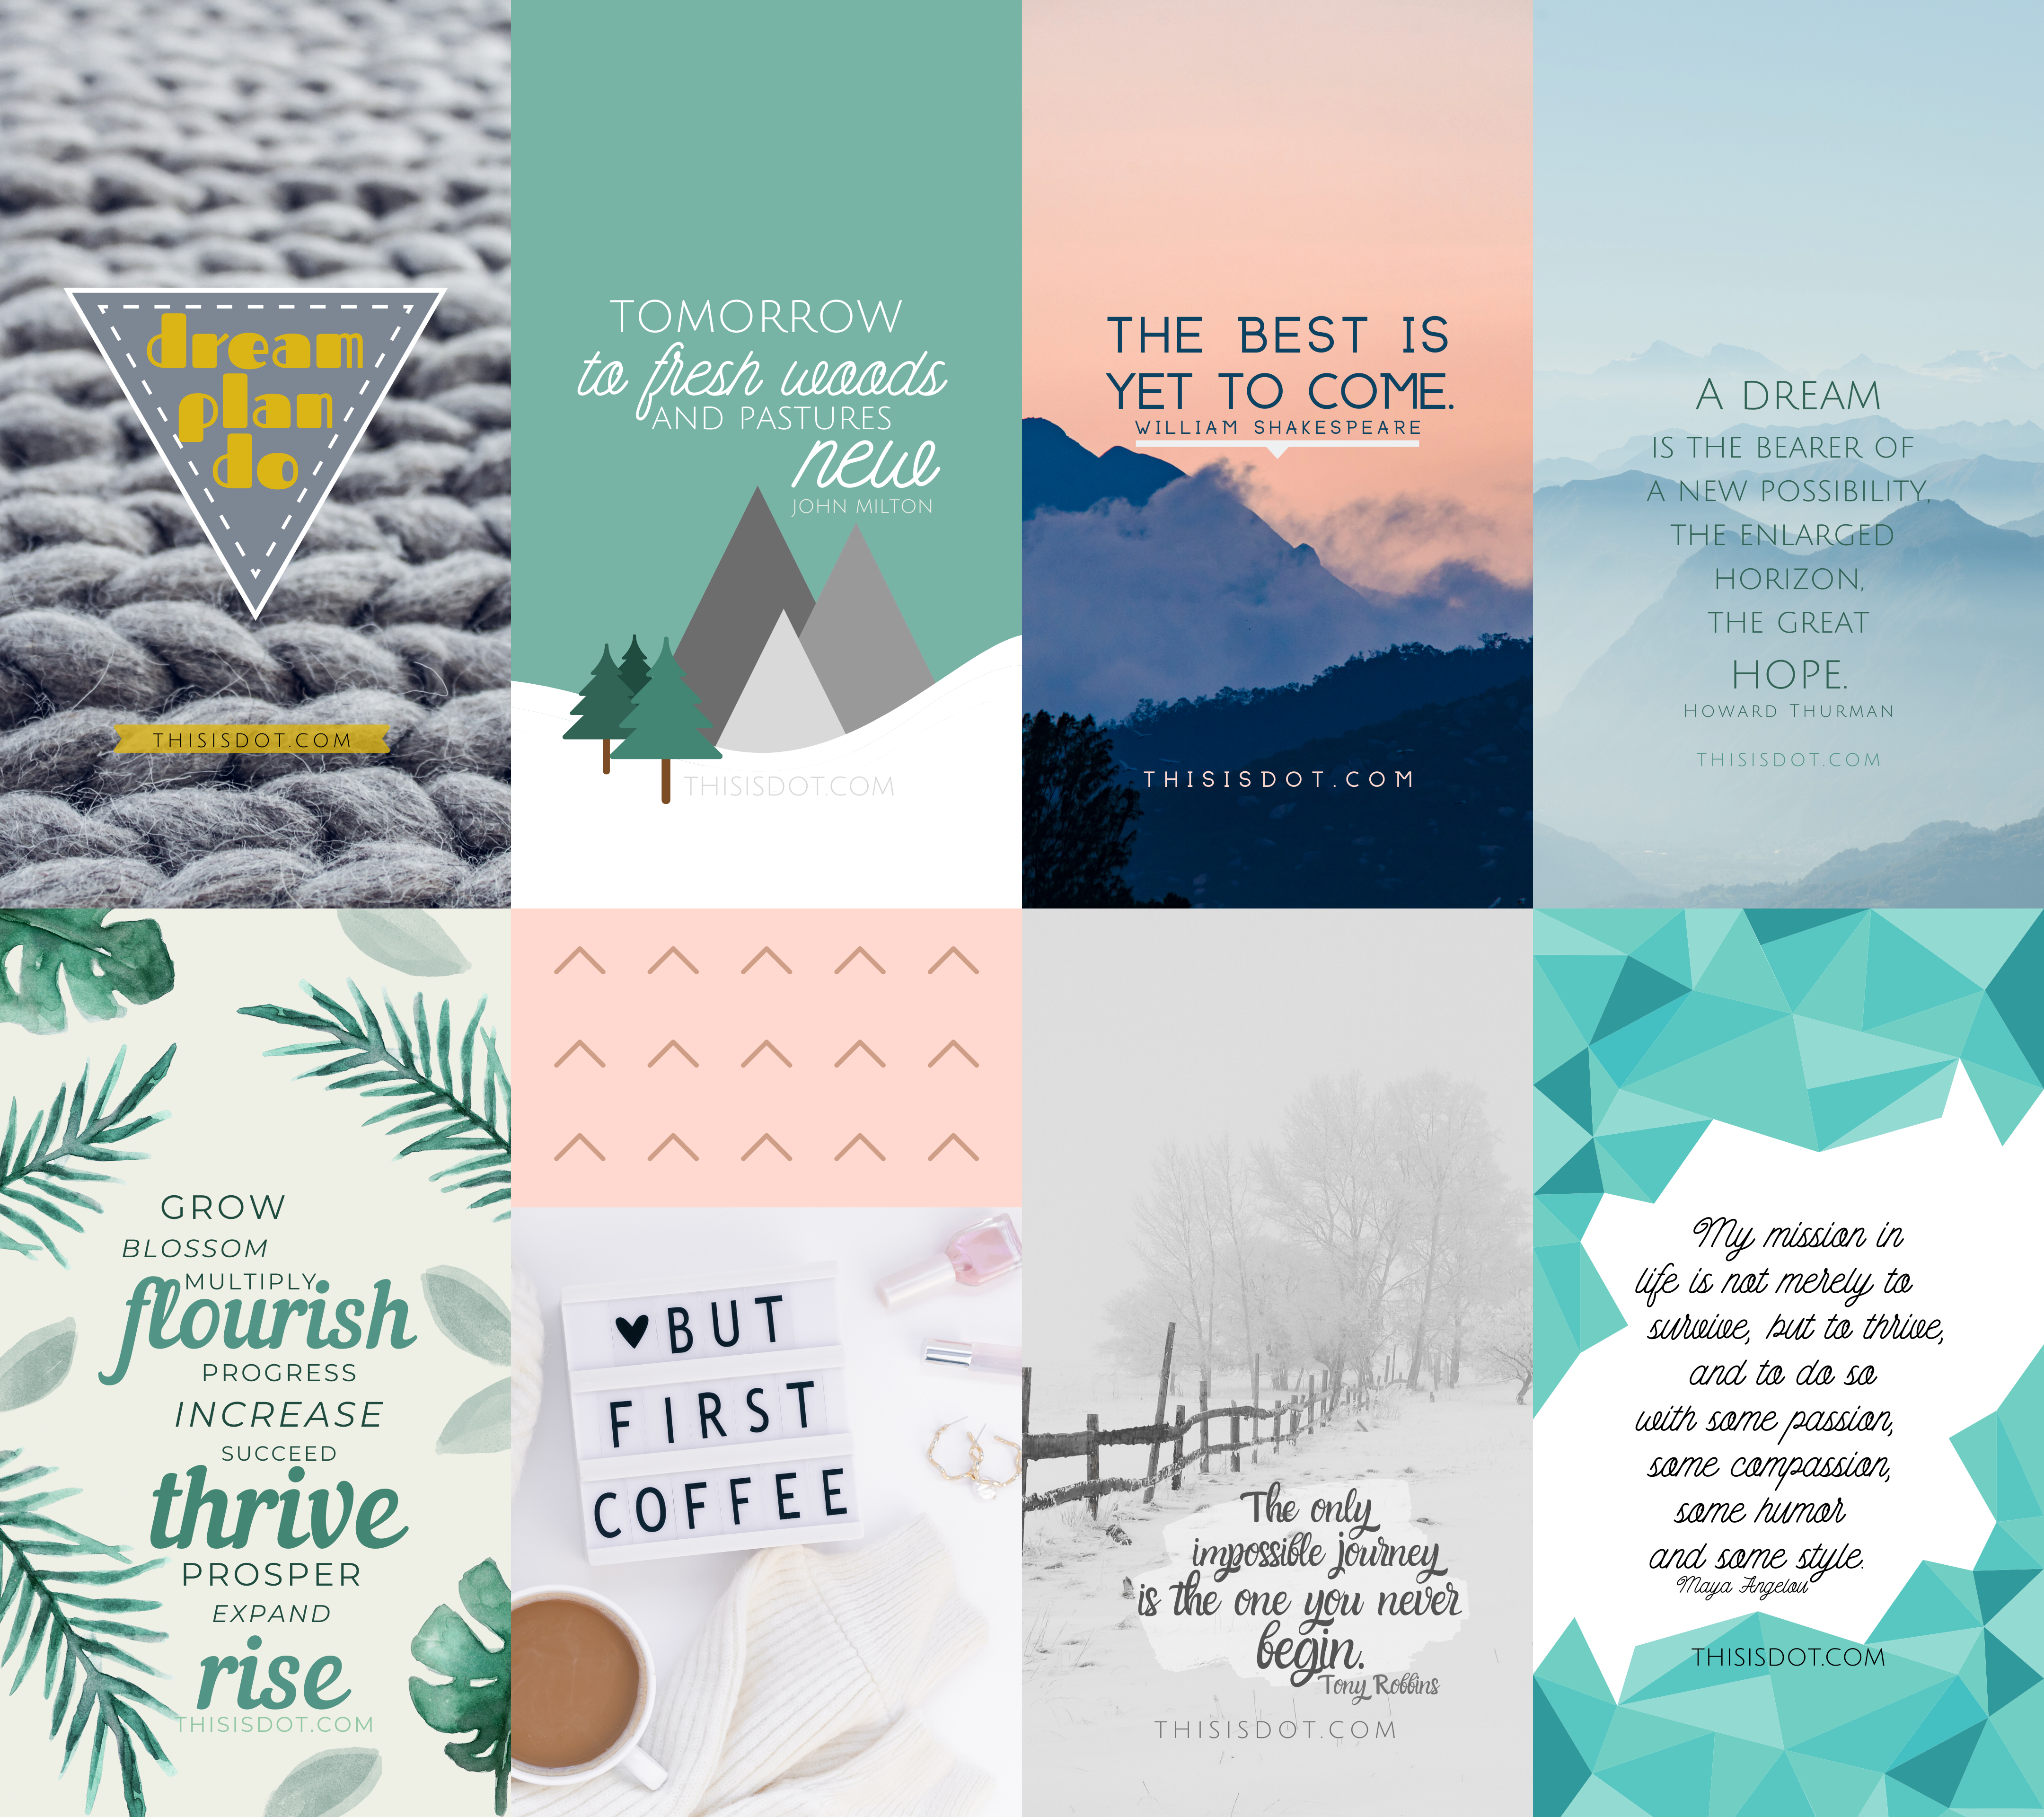 8 Free Wallpapers  for Direct Sellers to download in the New Year  |  thisisdot.com